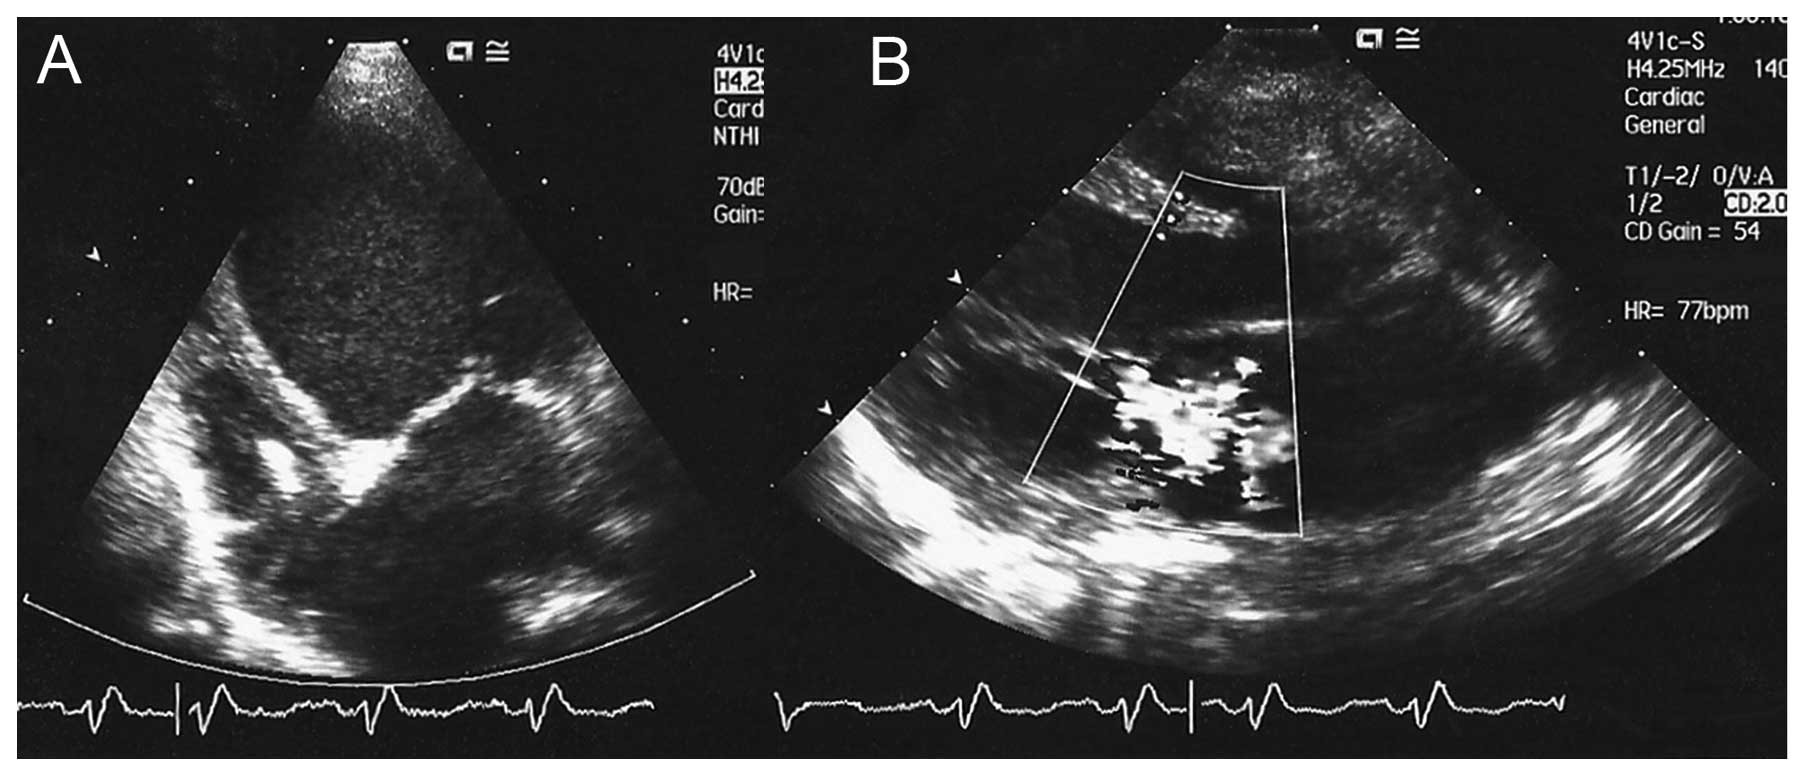 Dilated cardiomyopathy and ovarian dysgenesis in a patient with Malouf syndrome: A case report